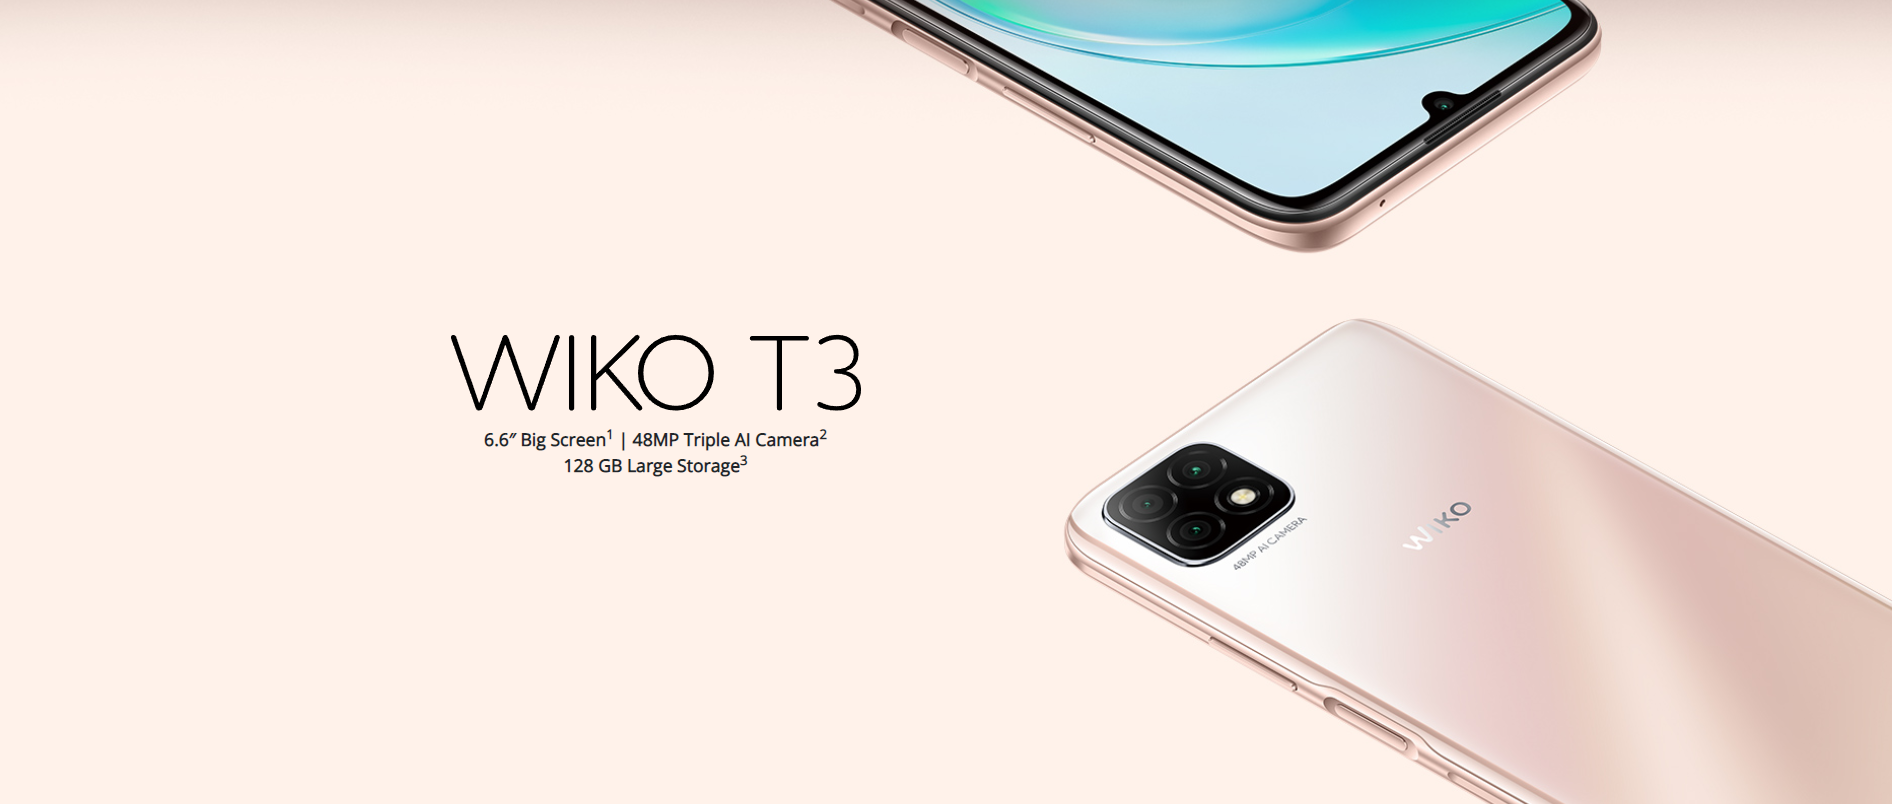 Is This The Price Of The Wiko T3 In The Philippines?